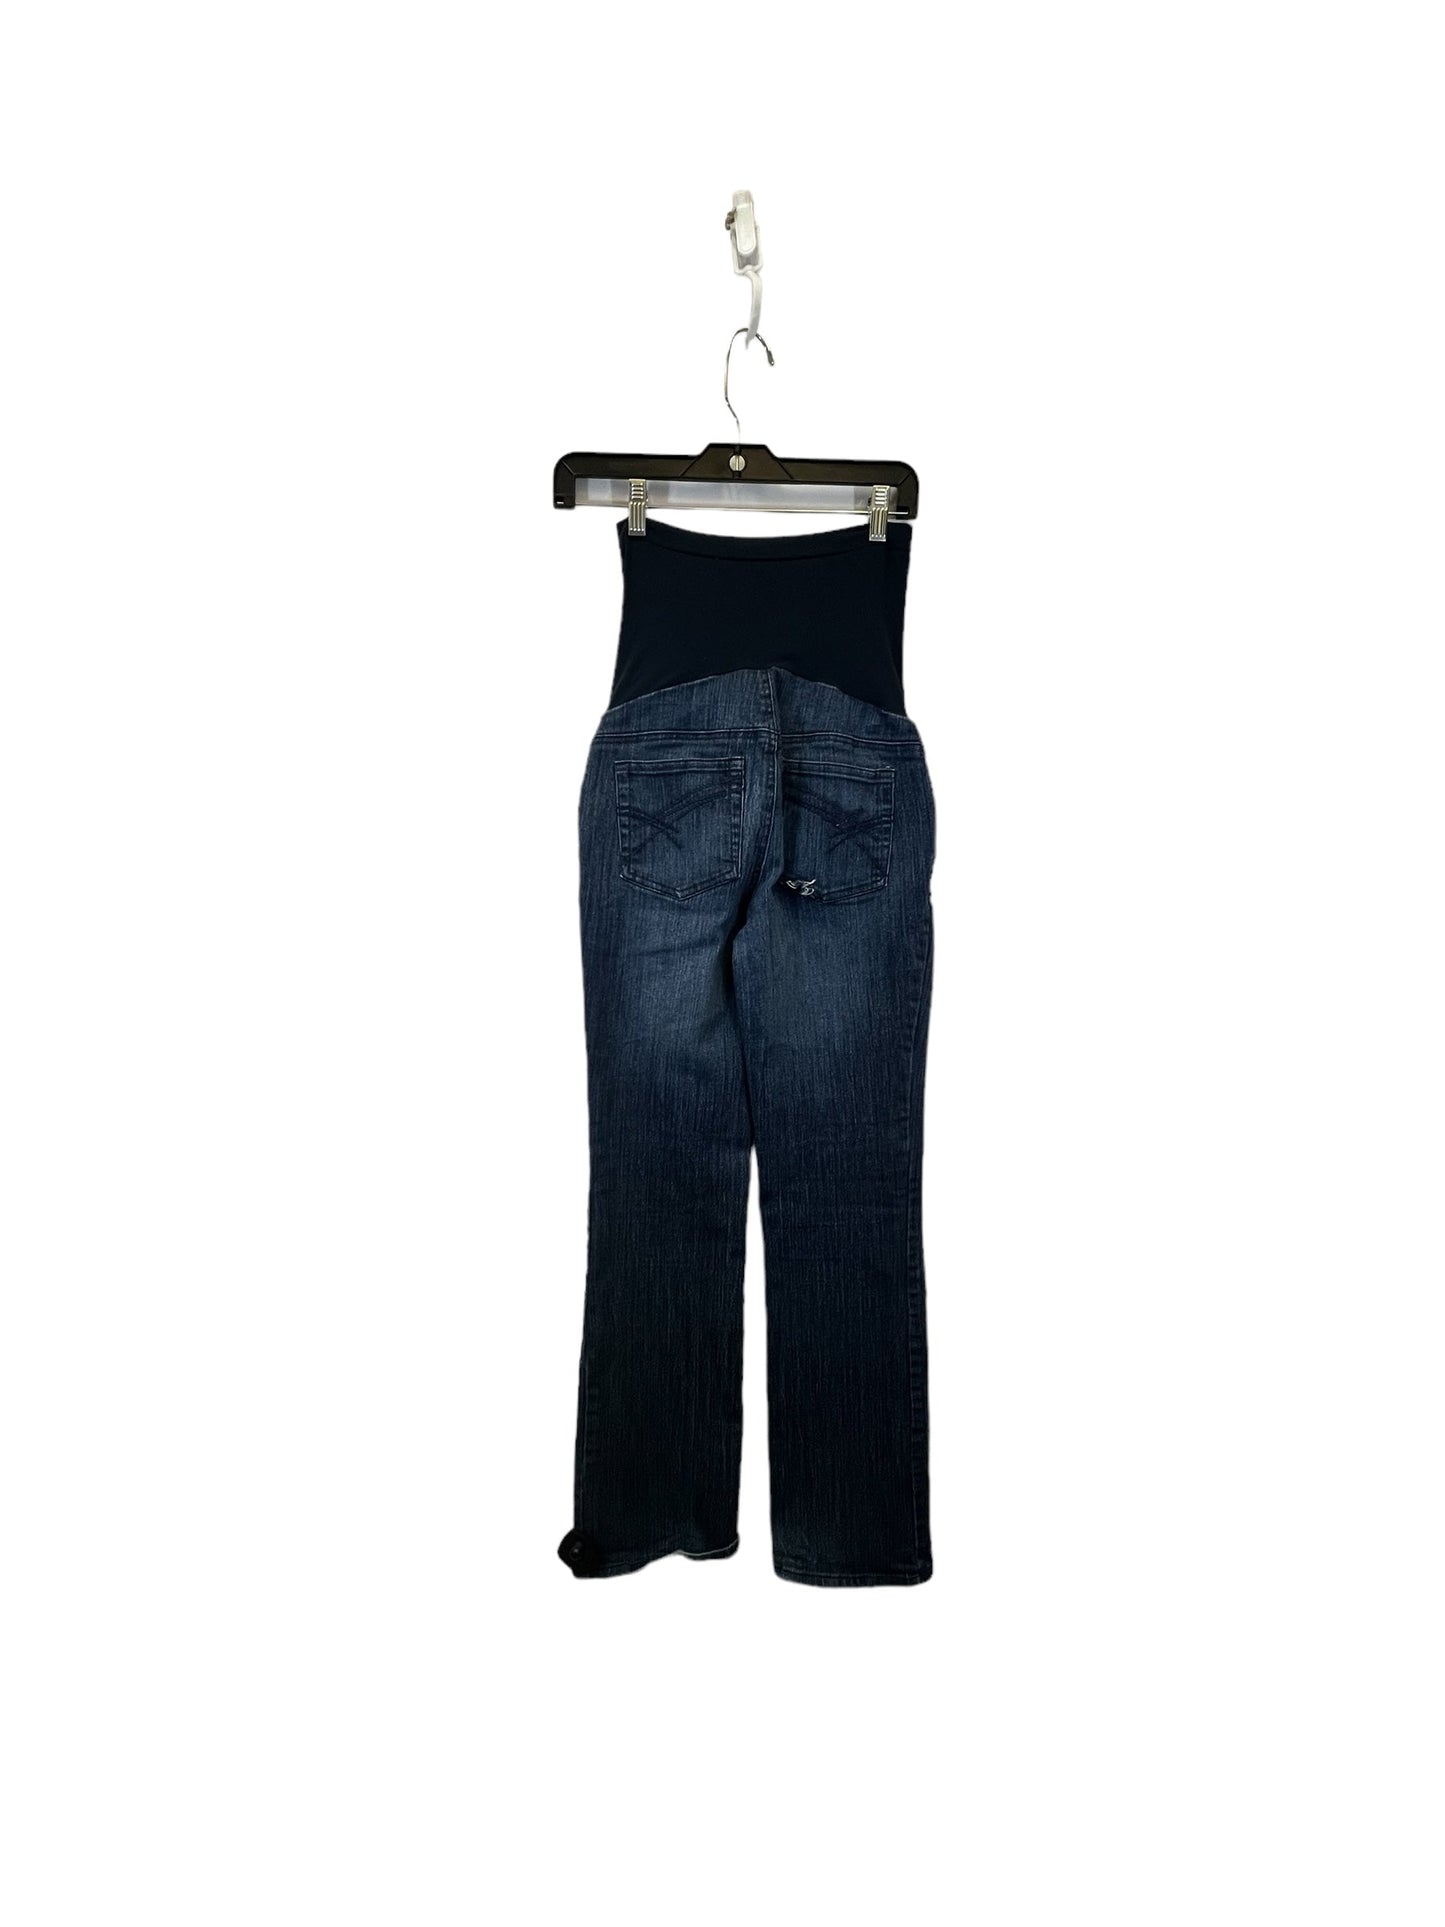 Maternity Jeans By Oh Baby By Motherhood  Size: S